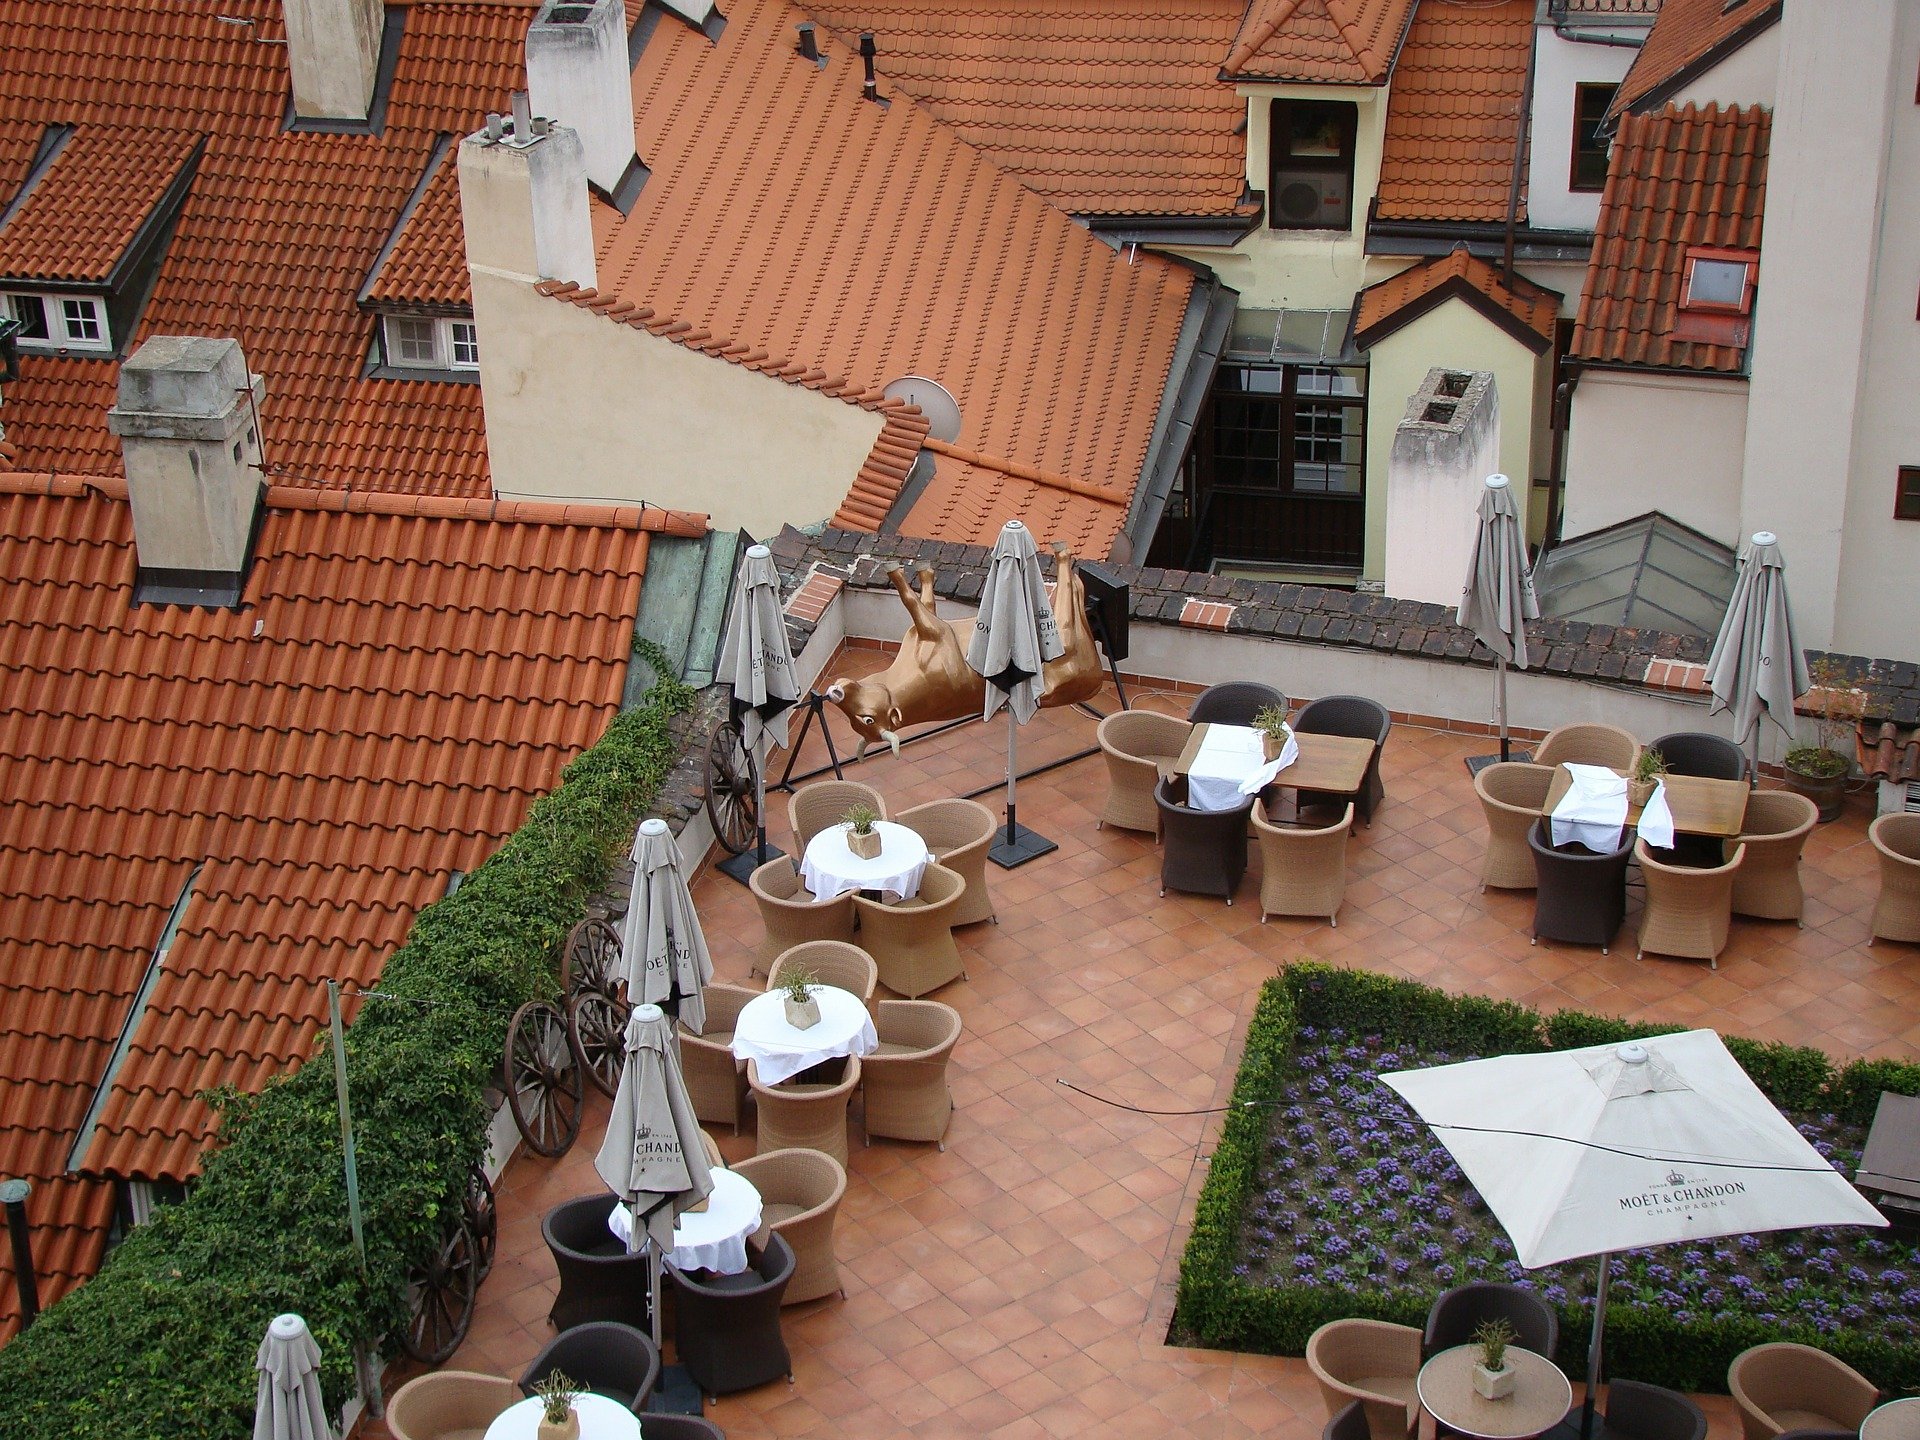 Pictured - Roof of a restaurant in Prague, Czech Republic | Source: Pixabay